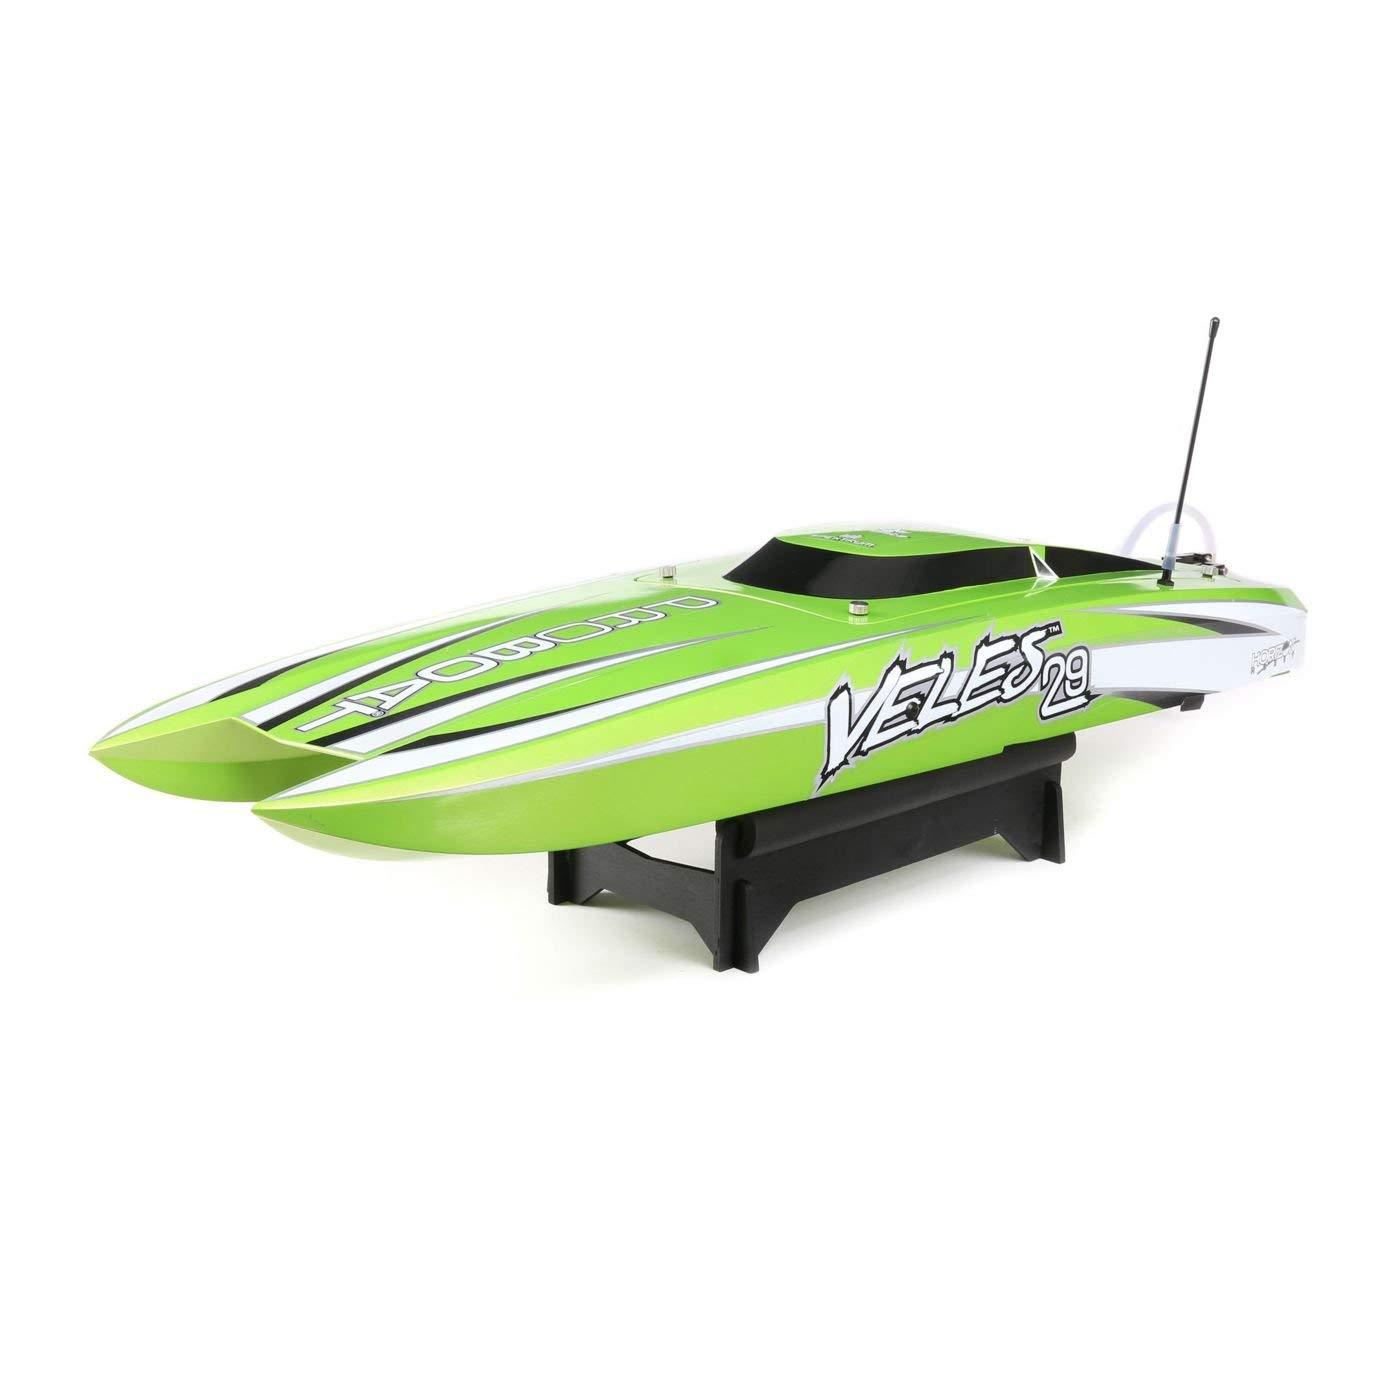 powerful rc boat